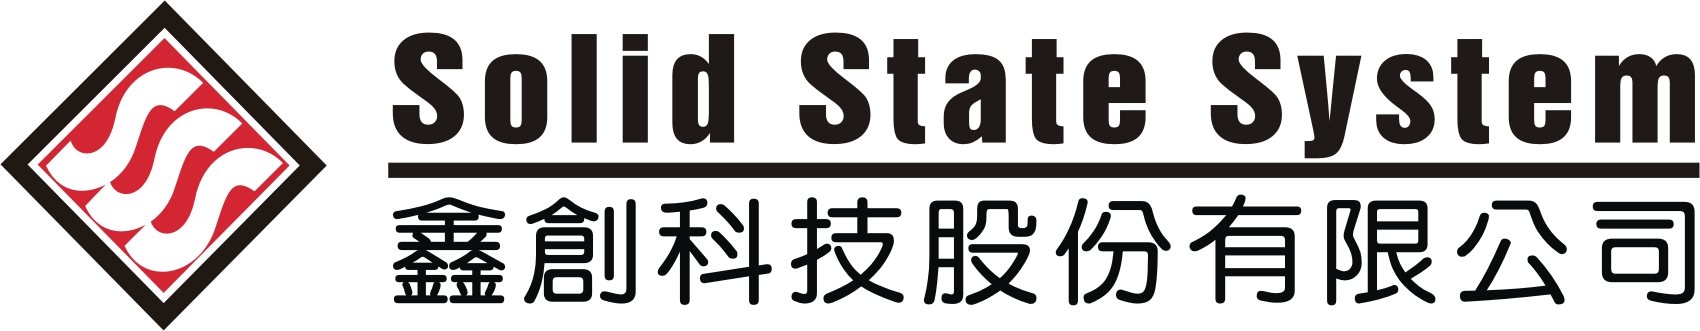  Solid State System Co., Ltd.